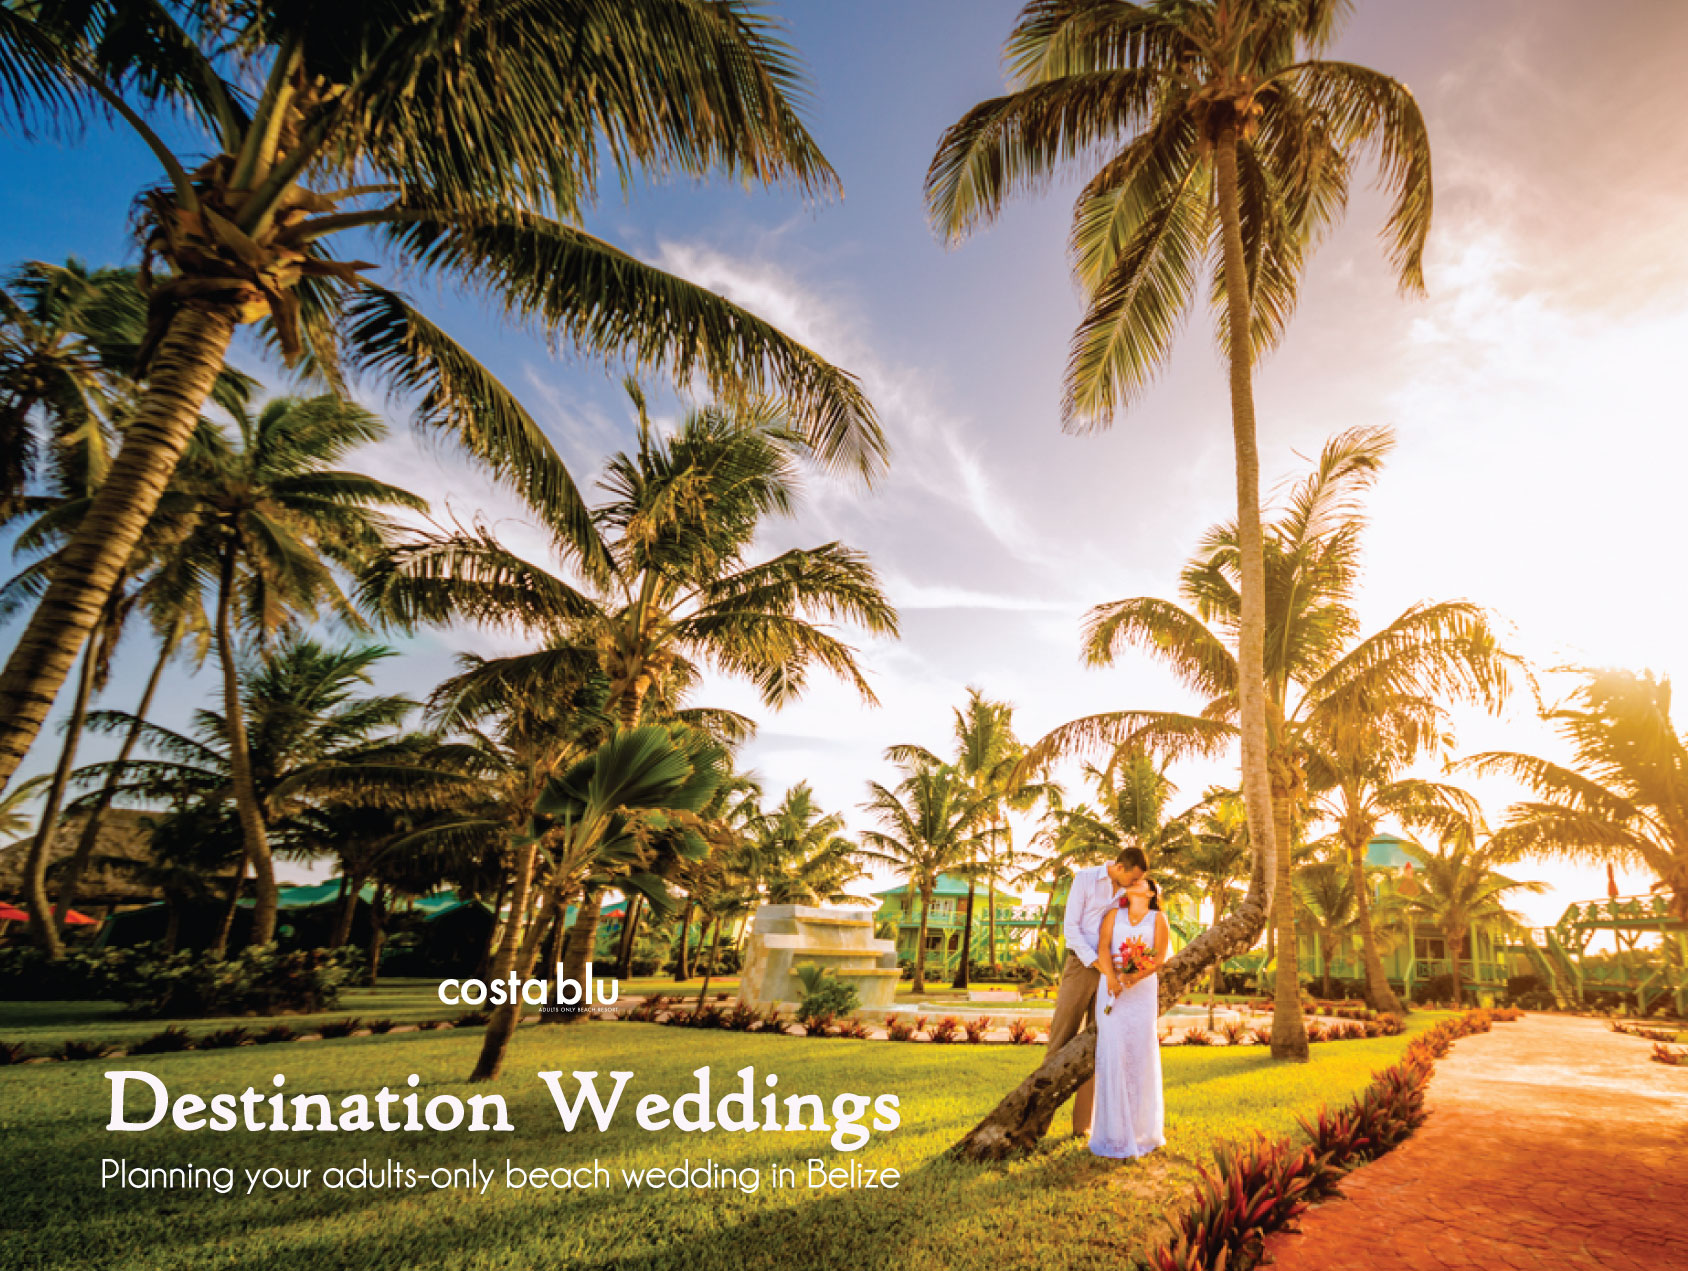 Destination-Weddings-Adults only